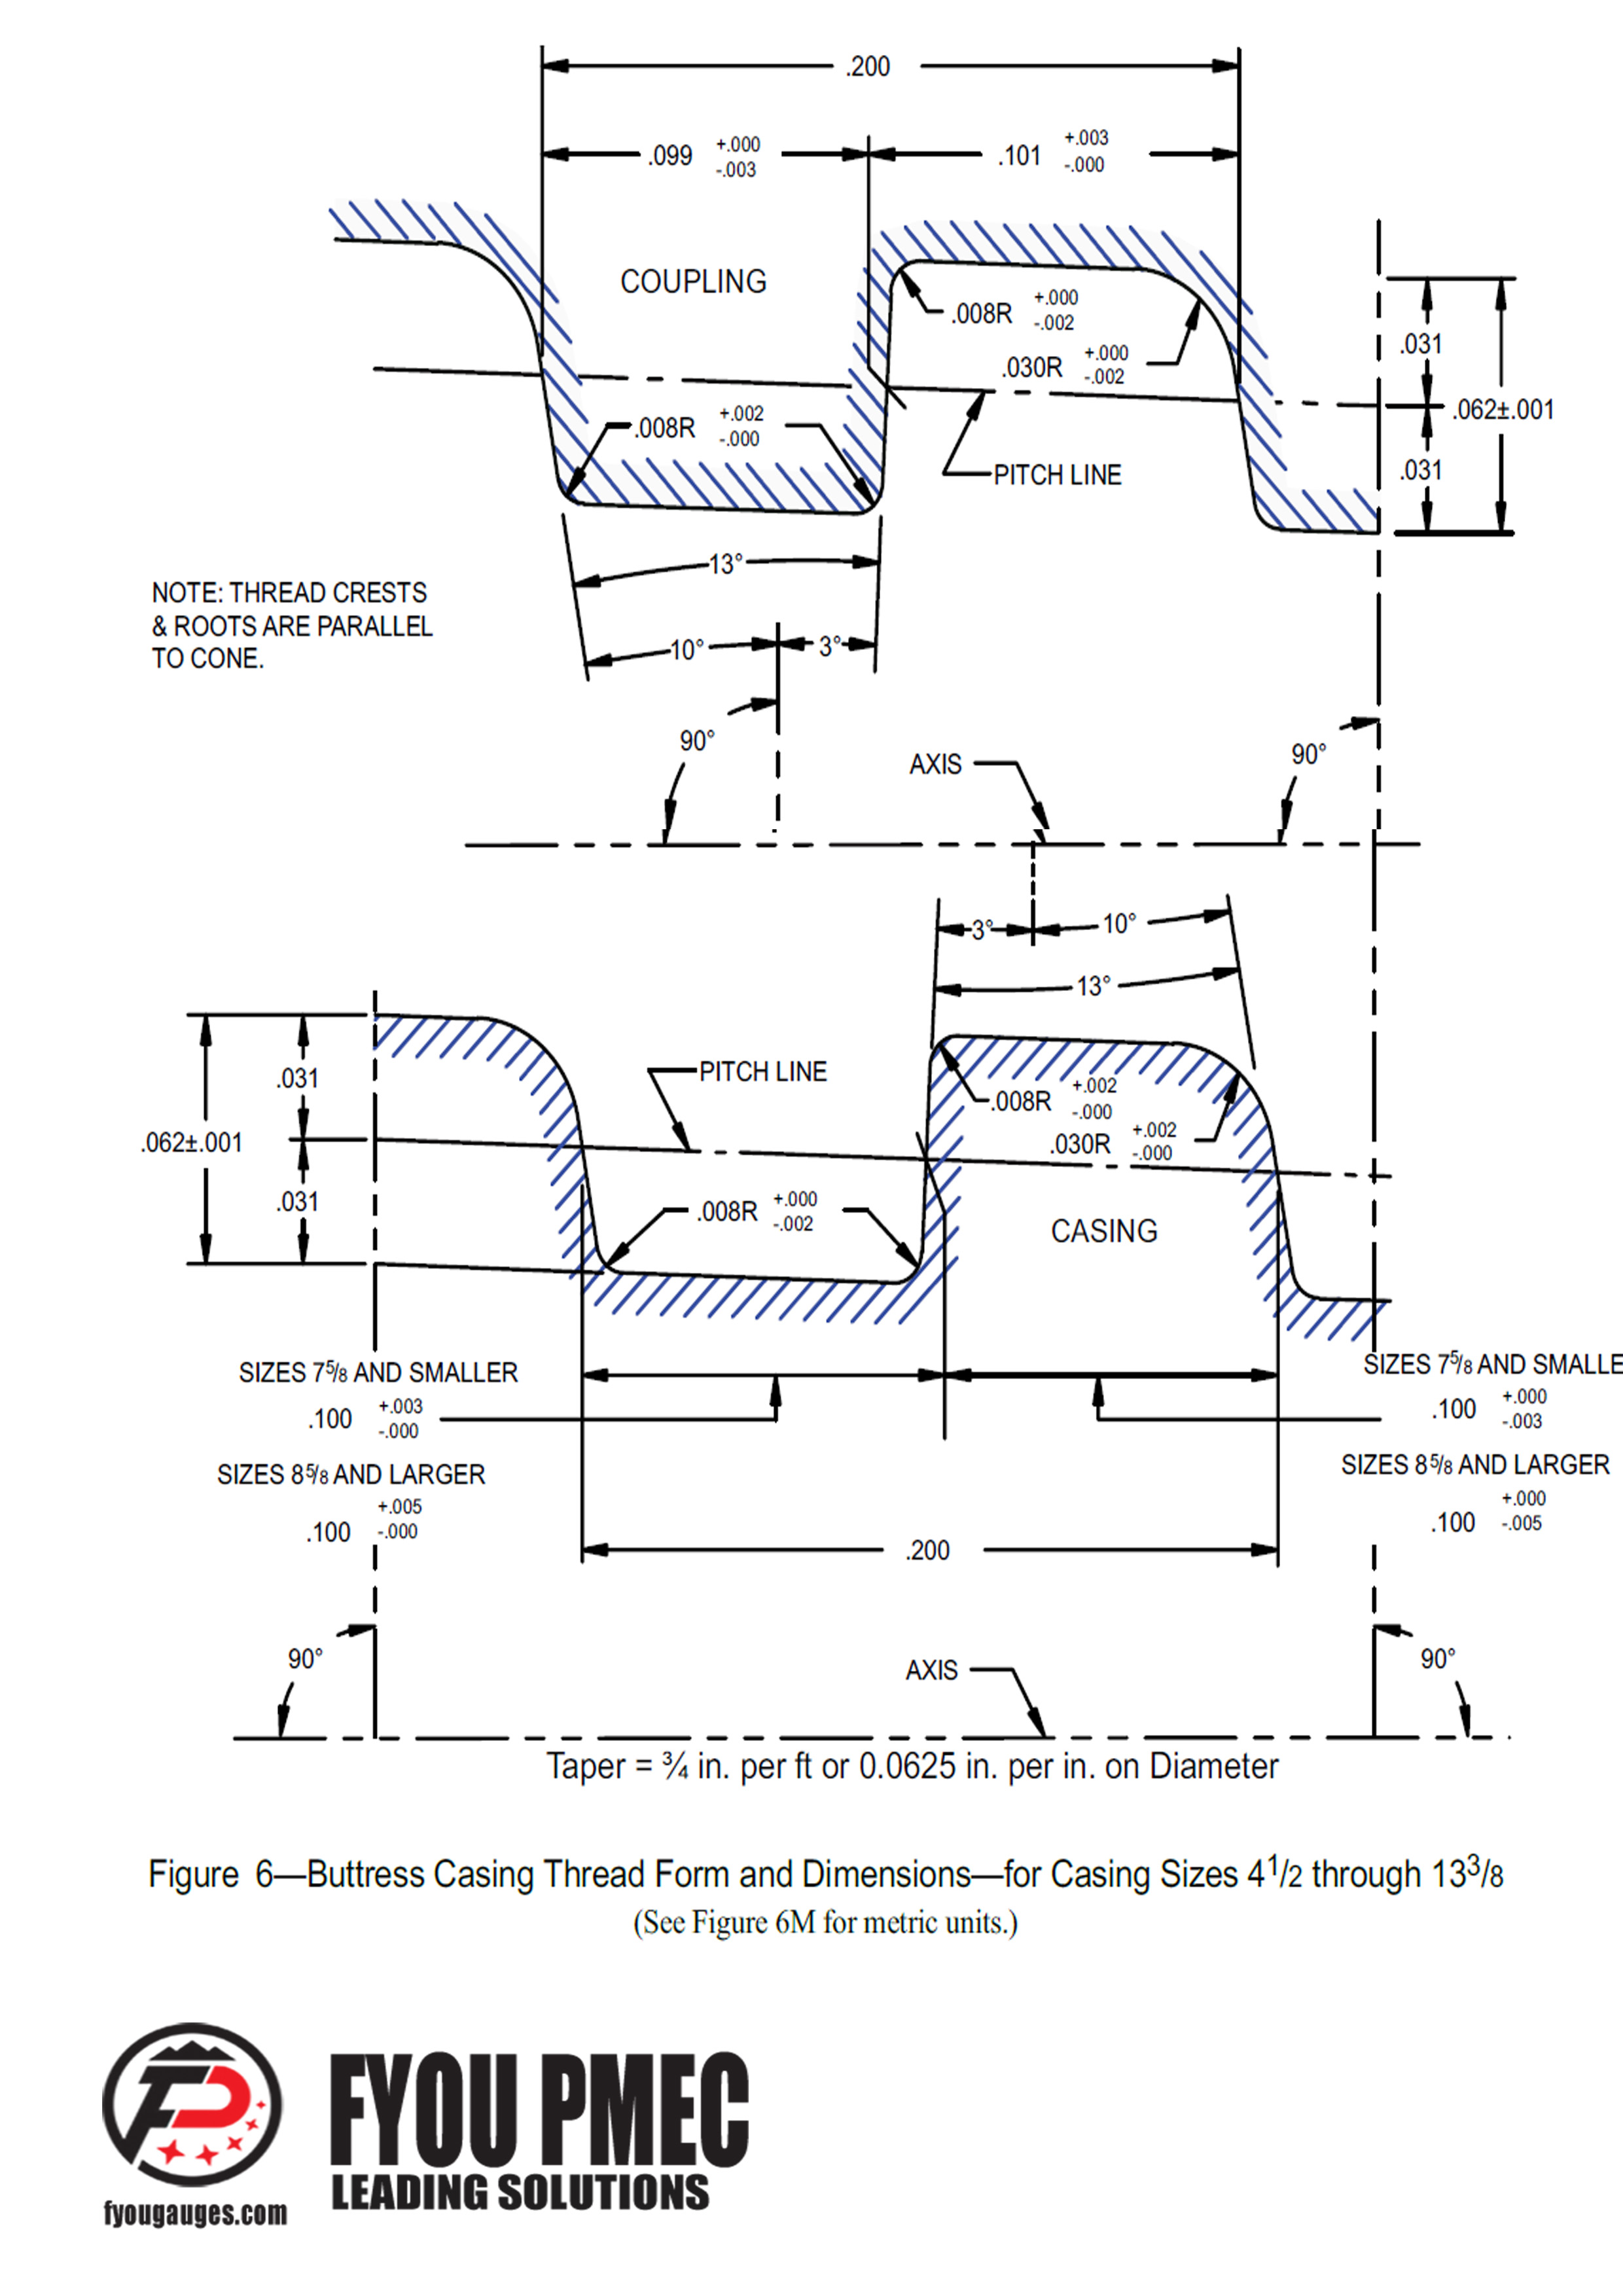 API Spec 5B Buttress Casing Thread Form and Dimensions for Casing Size 4 12 through 13 38